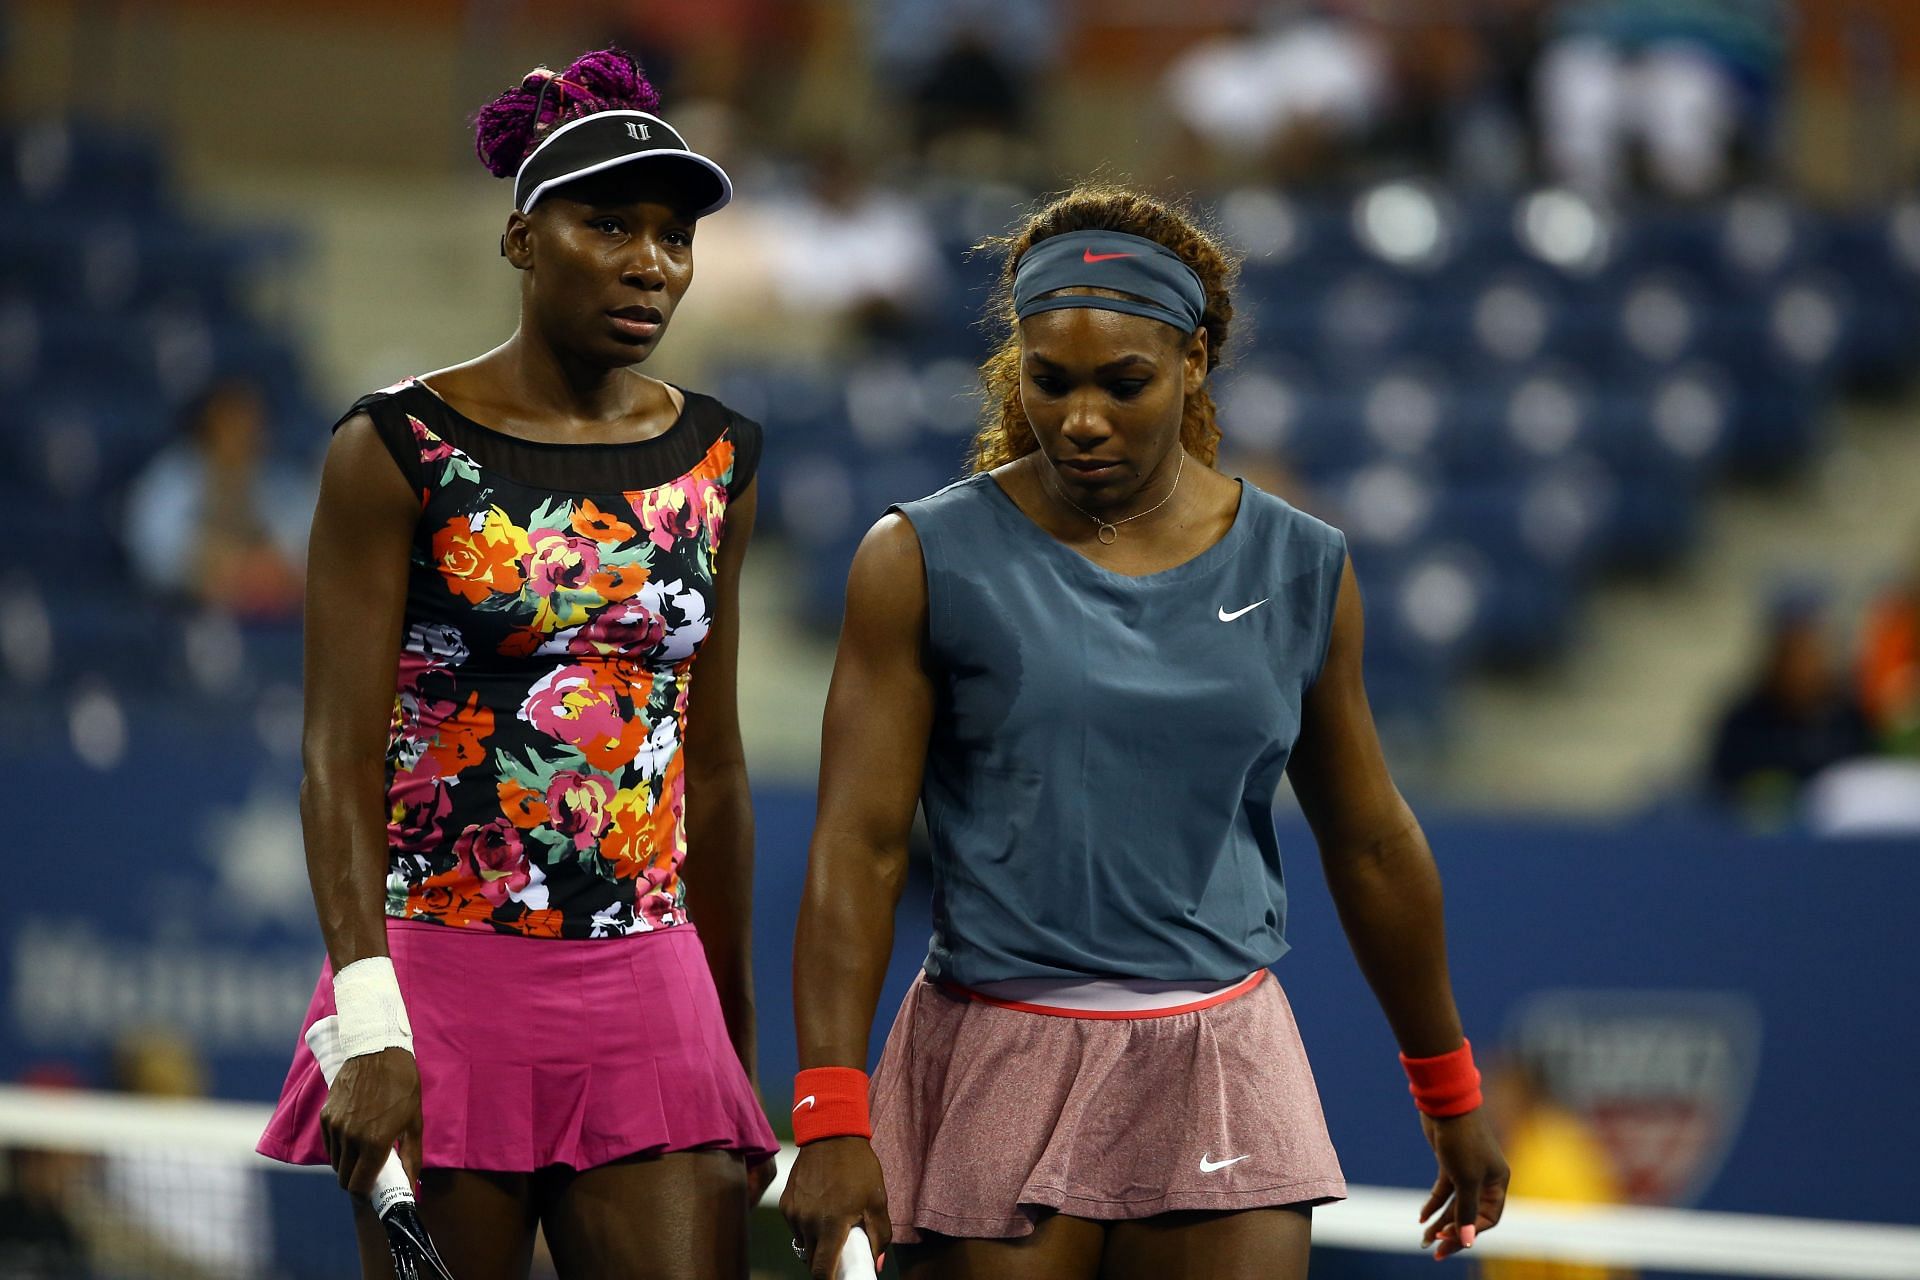 Serena and Venus Williams at the 2013 US Open